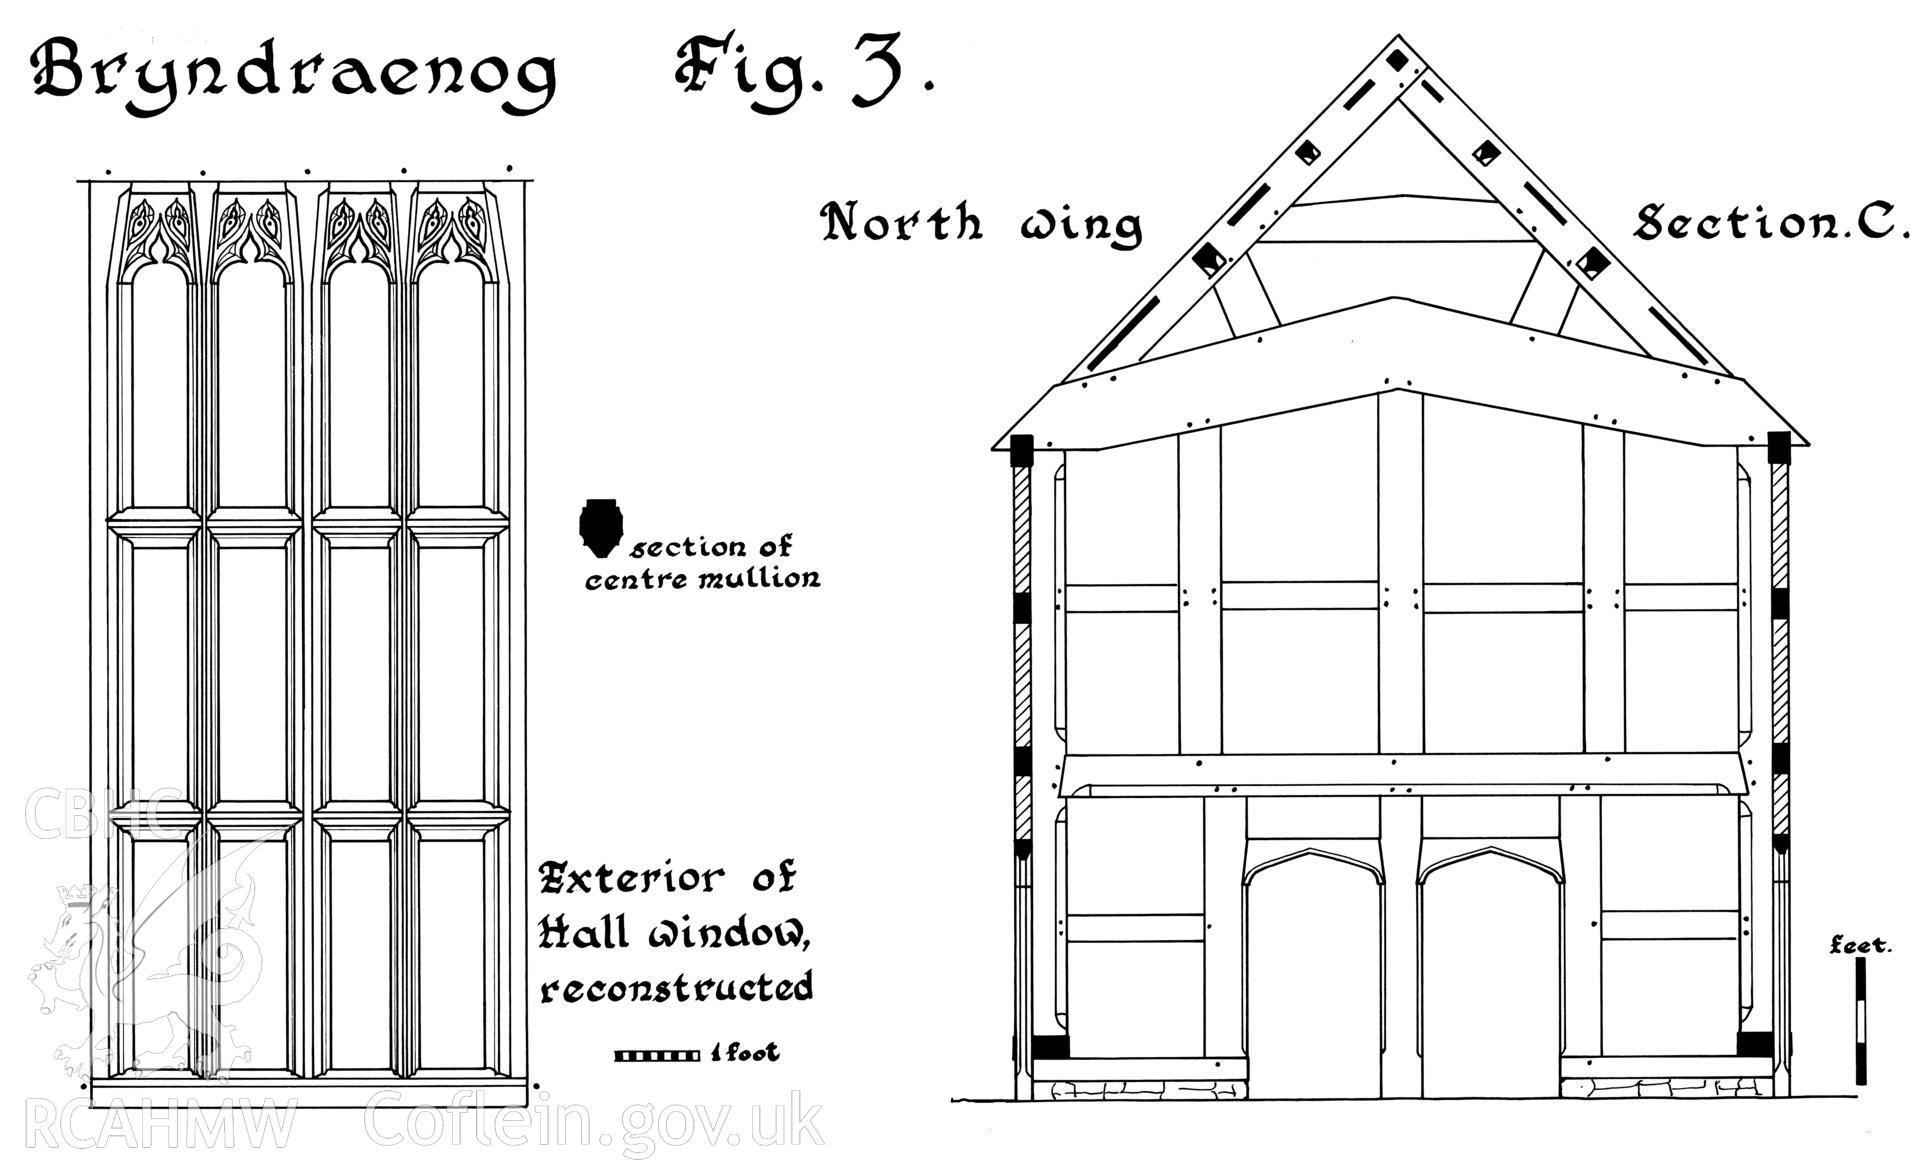 RCAHMW drawing showing section and detail at Bryndraenog, Bugeildy.